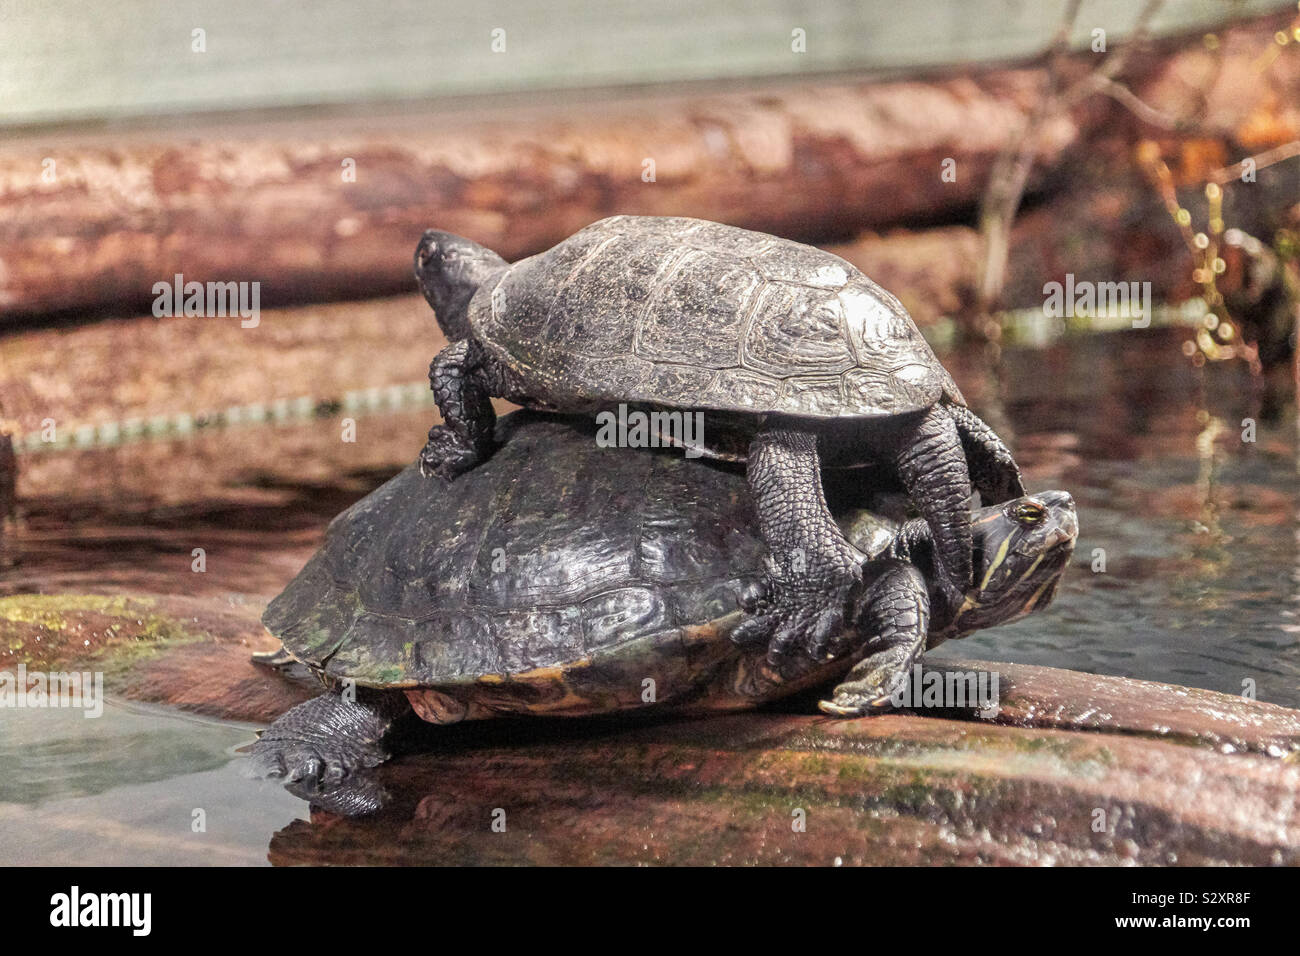 Two Turtles climbing on top of each other. A little sits on the large, a Turtle Double at the edge of the Water Stock Photo